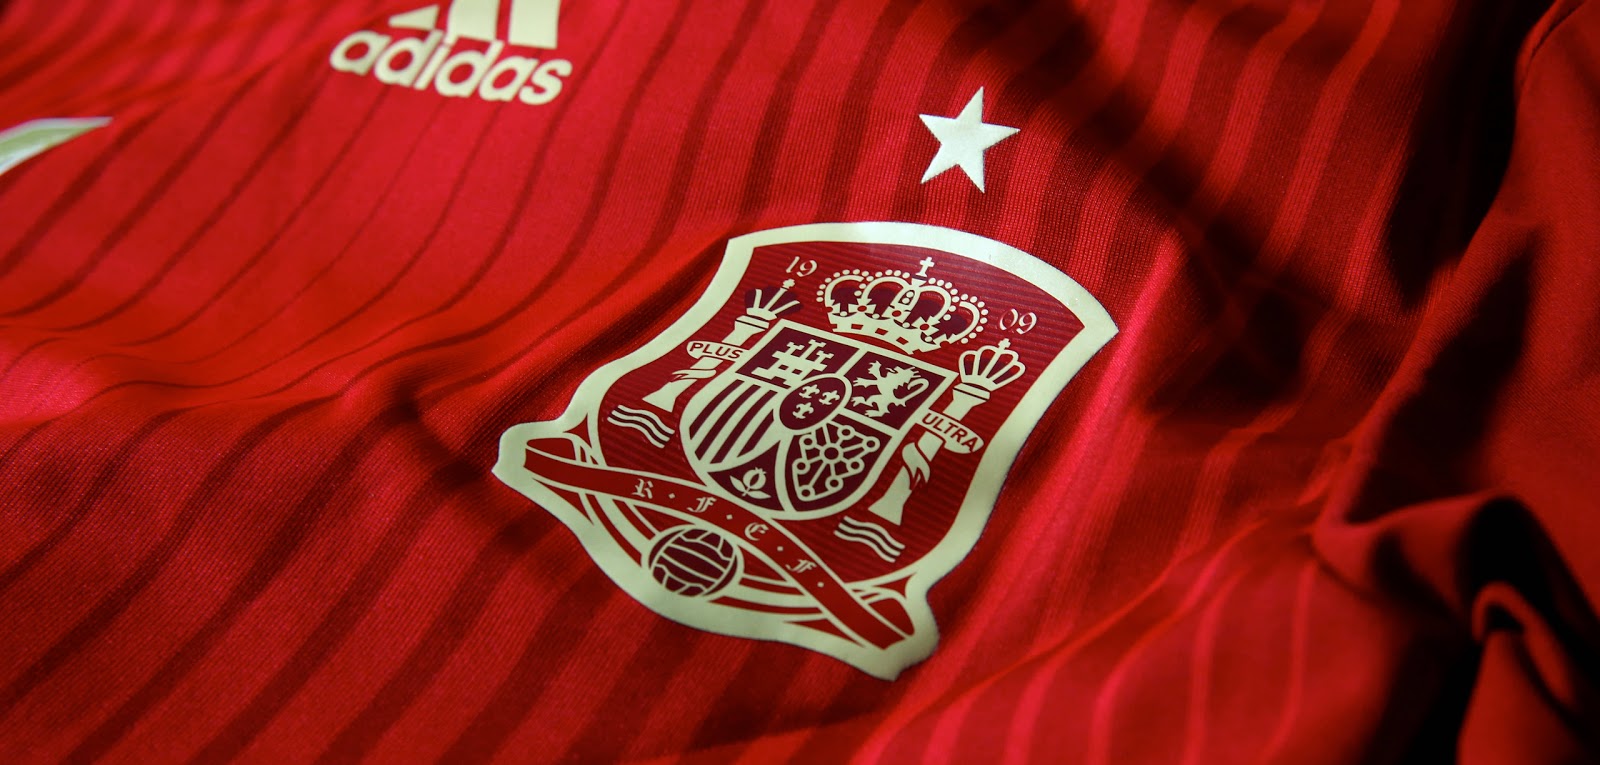 Spain 2014 World Cup Home Kit (8)